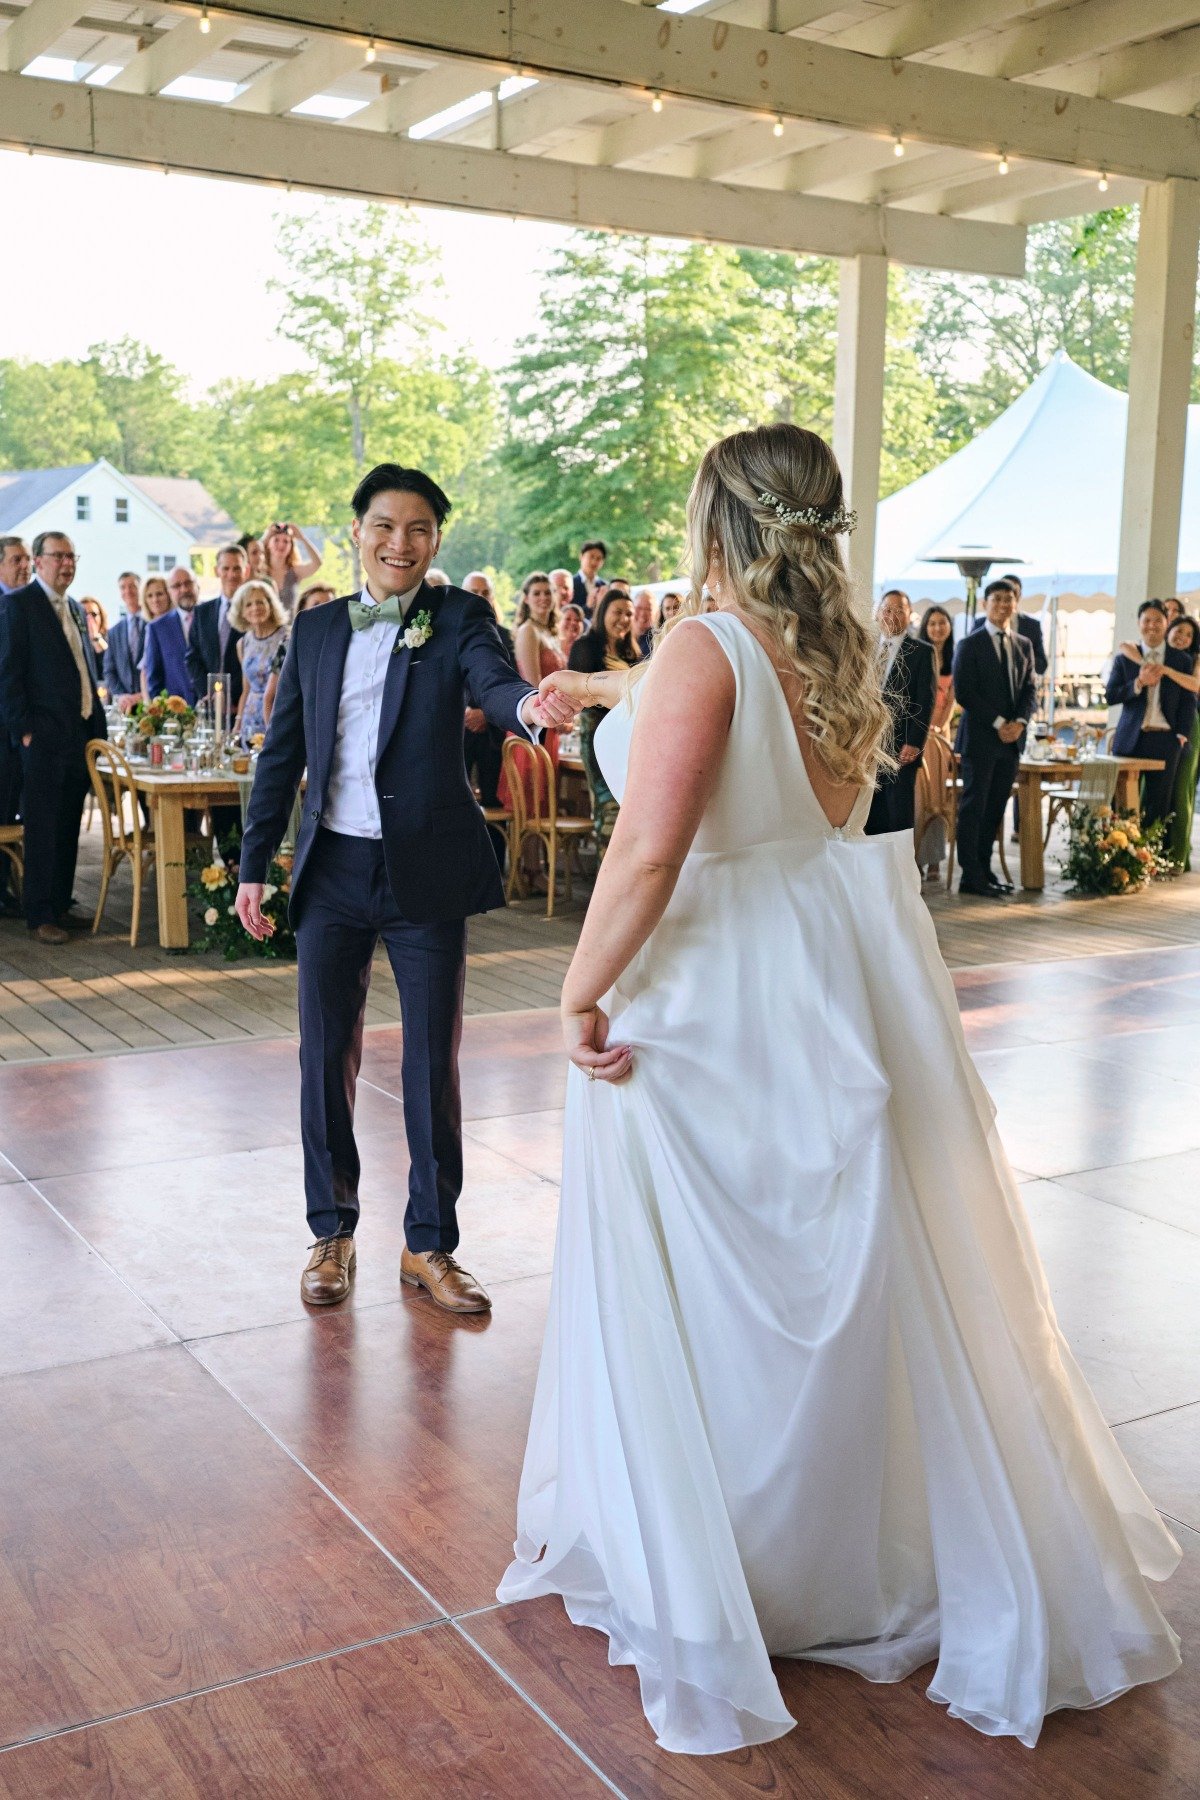 Happy first dance at outdoor wedding reception in Hudson Valley